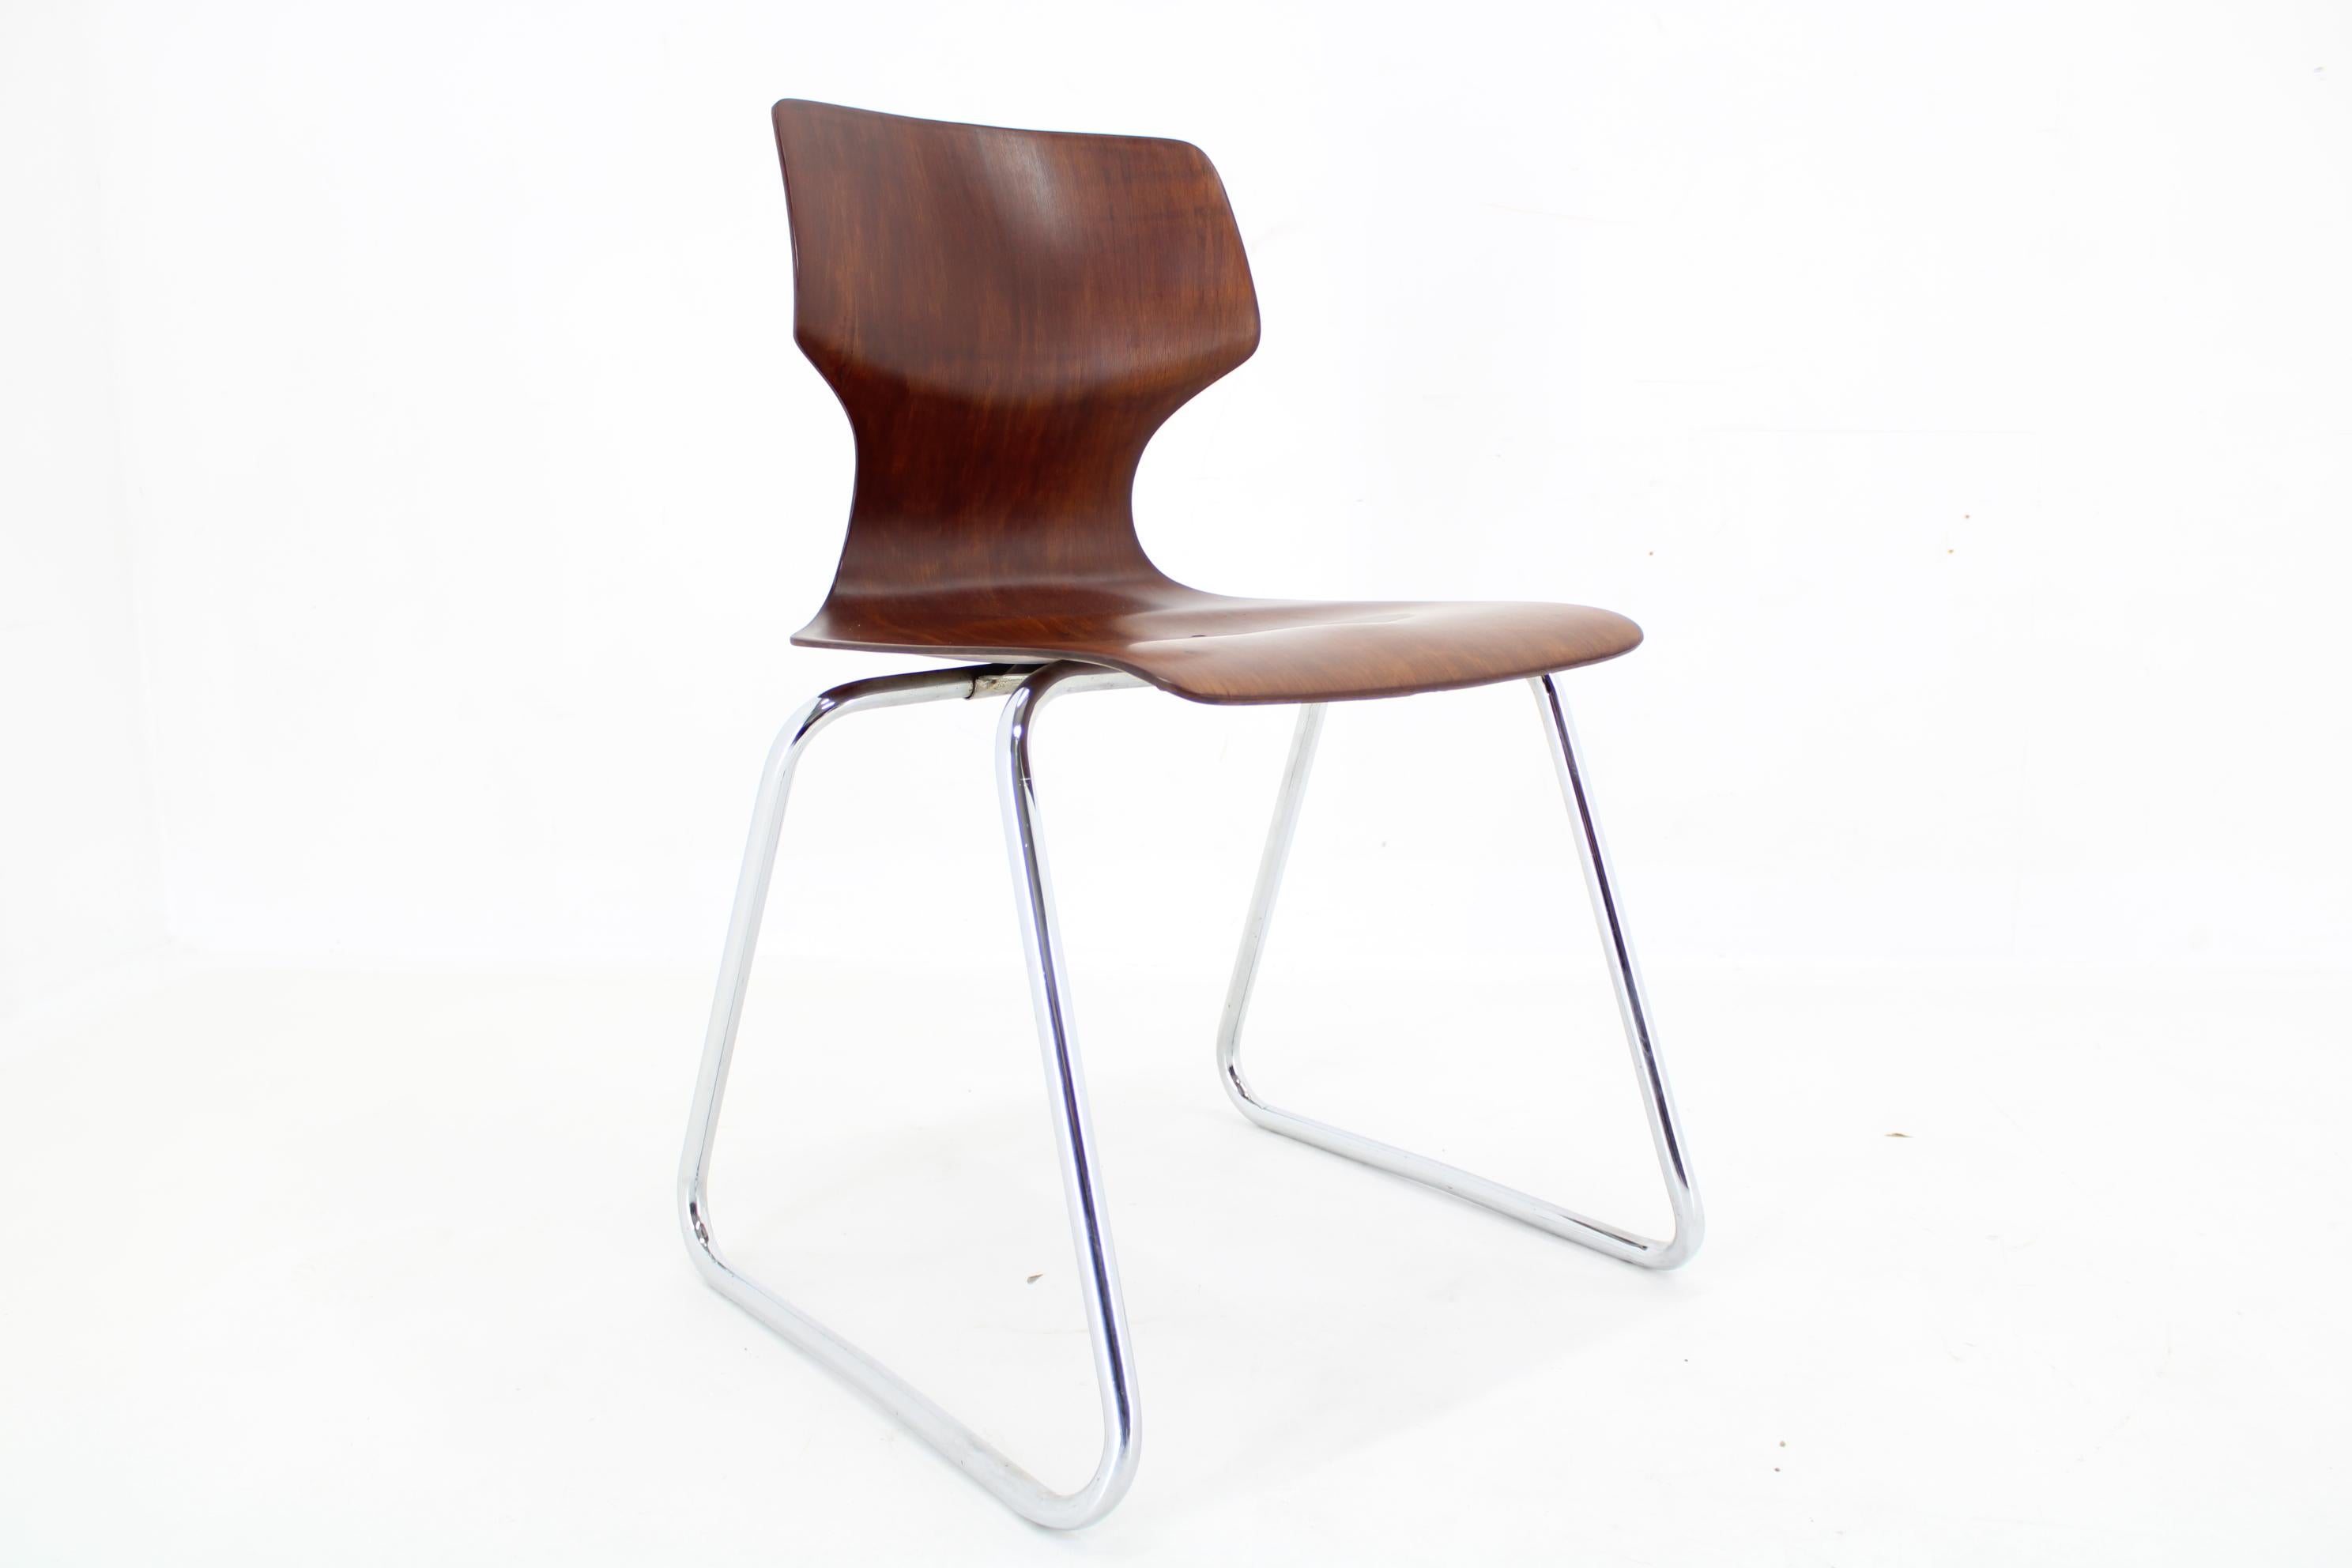 Mid-Century Modern 1970s Elmar Flototto Dining or Side Chair, Germany -40 Pieces Available For Sale